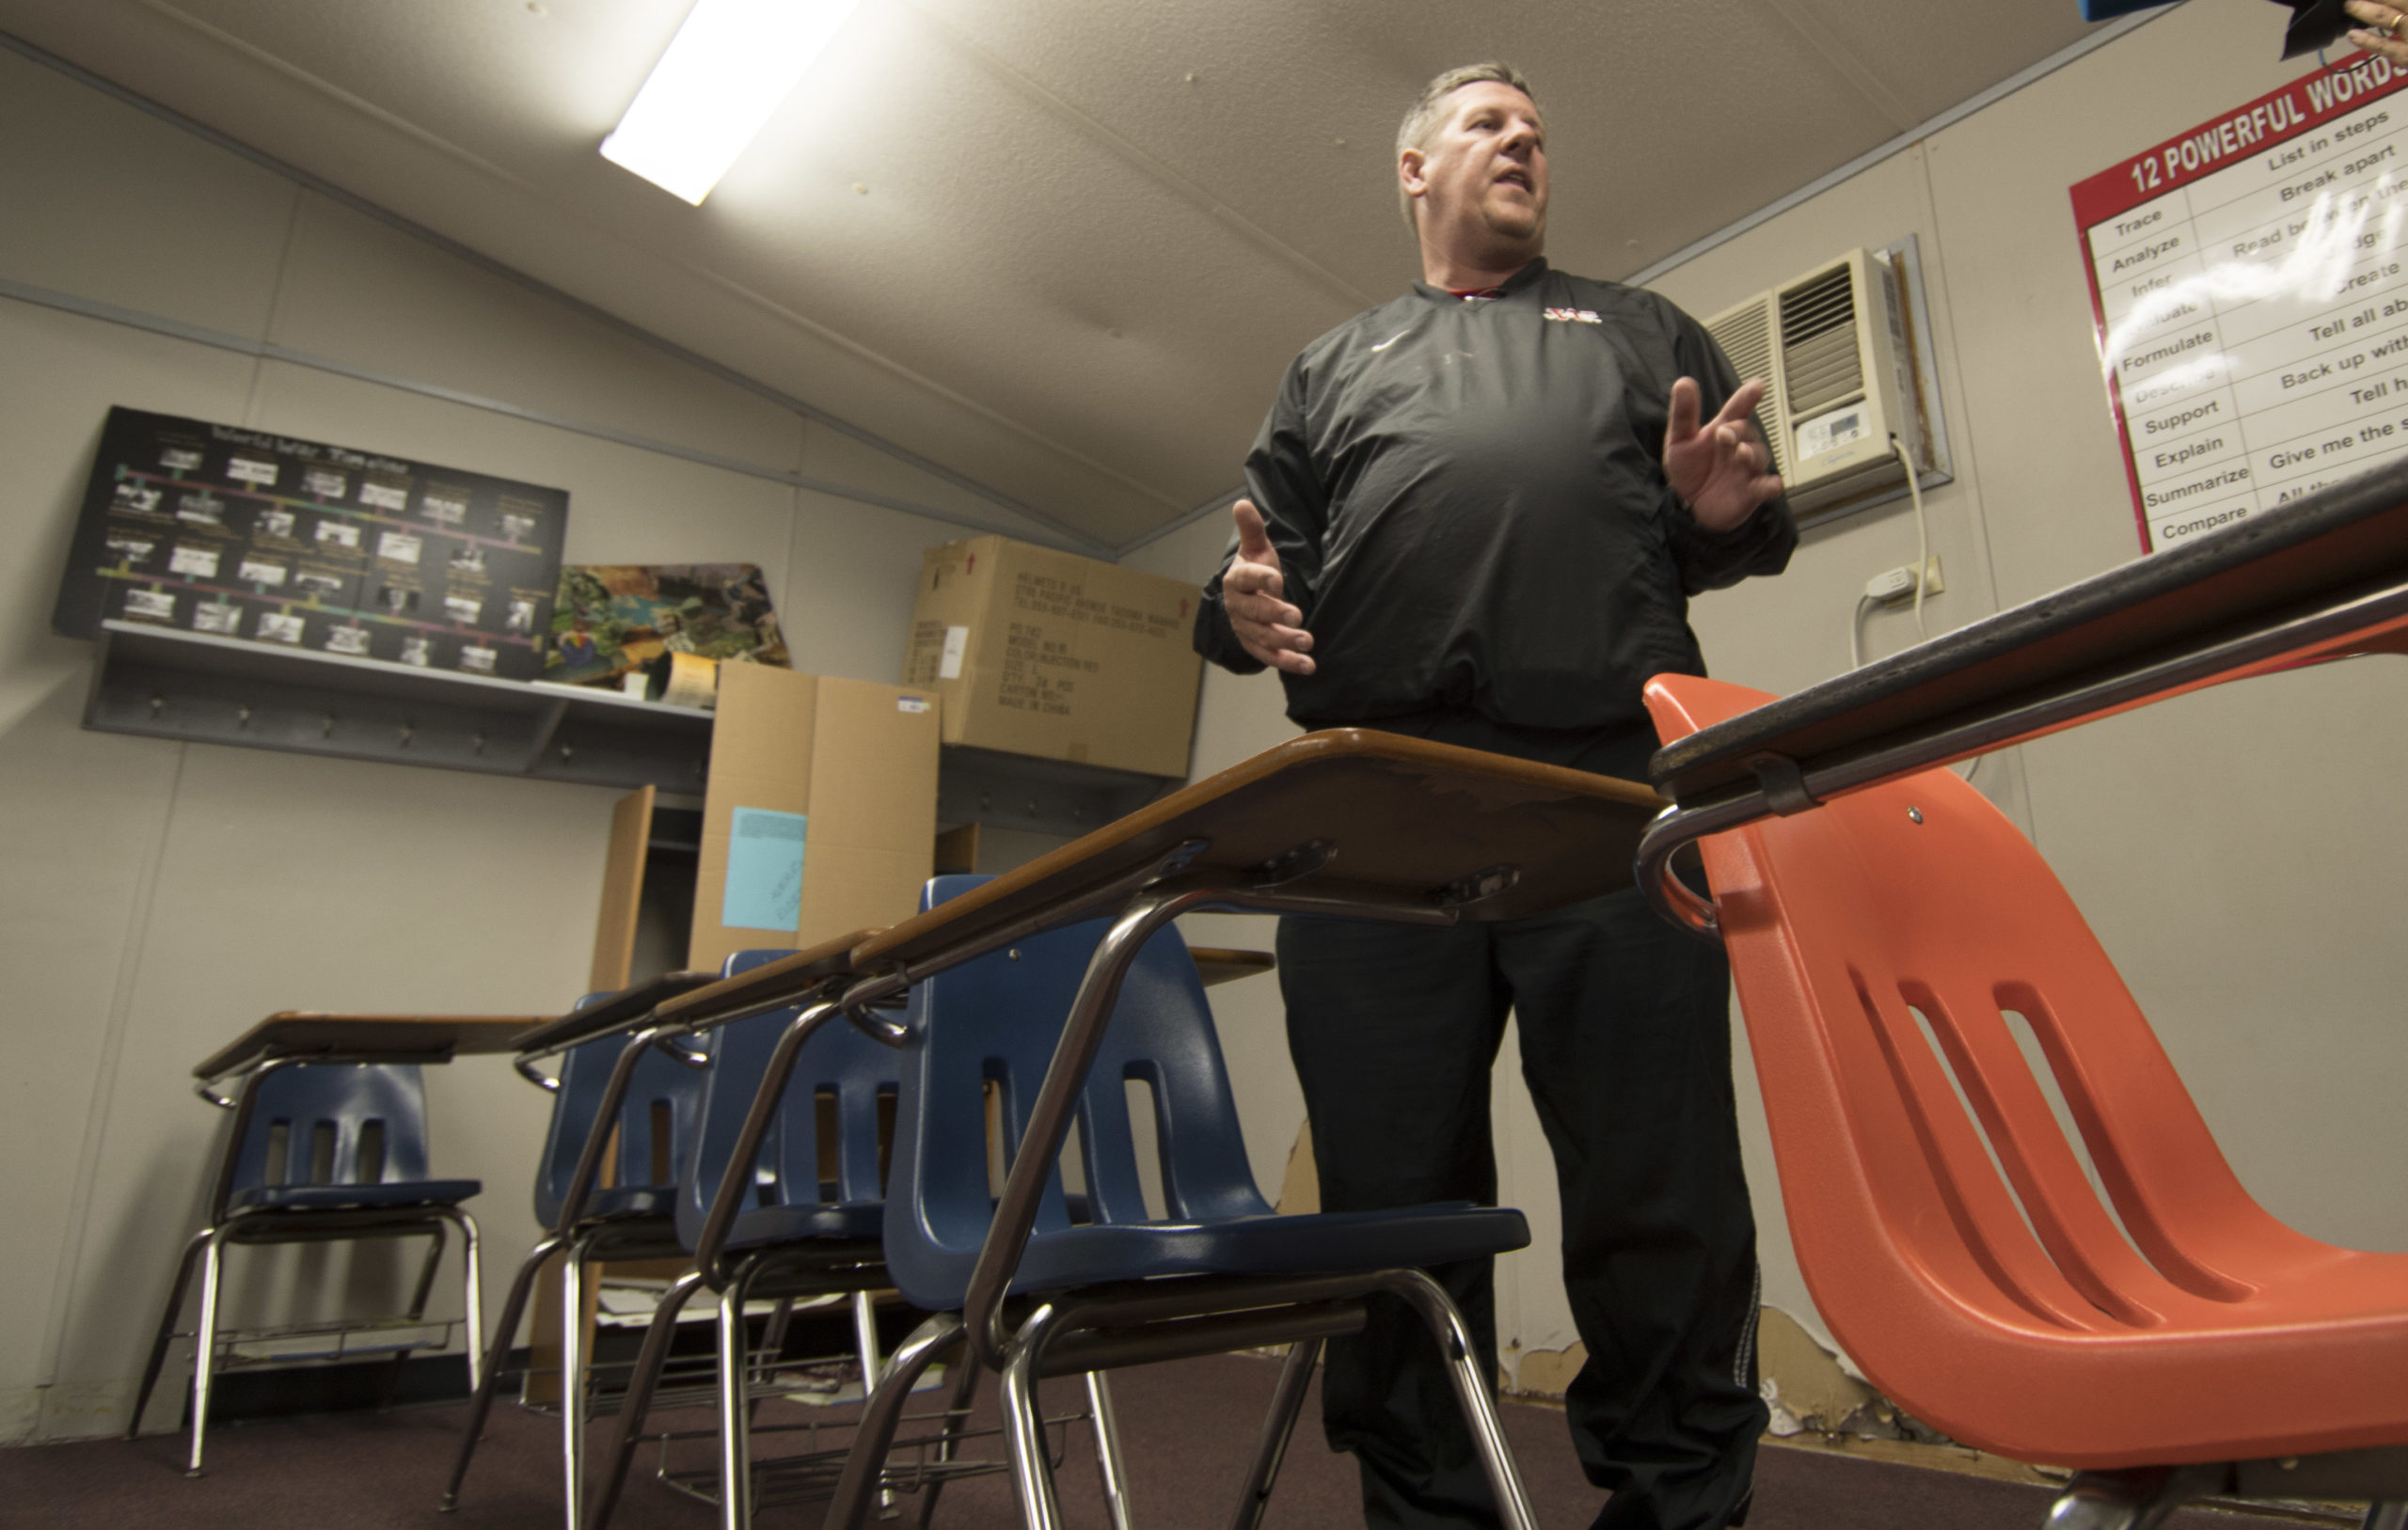 Scott Teel talks about his classroom in a portable building in Moore, Oklahoma on April 4, 2018. Buoyed by a nine-day strike in West Virginia which led to a five percent pay raise, teachers have also walked off the job in Oklahoma and Kentucky and are threatening to do the same in Arizona. Teel pointed to lawmakers as the source of the problem, saying there has been a "lack of vision about education from the state legislature." Teel teaches history using 10-year-old books in a prefabricated trailer with peeling paint. There is no budget for a photocopier or staplers and Teel said parents and teachers dip into their pockets to provide supplies. / AFP PHOTO / J Pat Carter (Photo credit should read J PAT CARTER/AFP via Getty Images)